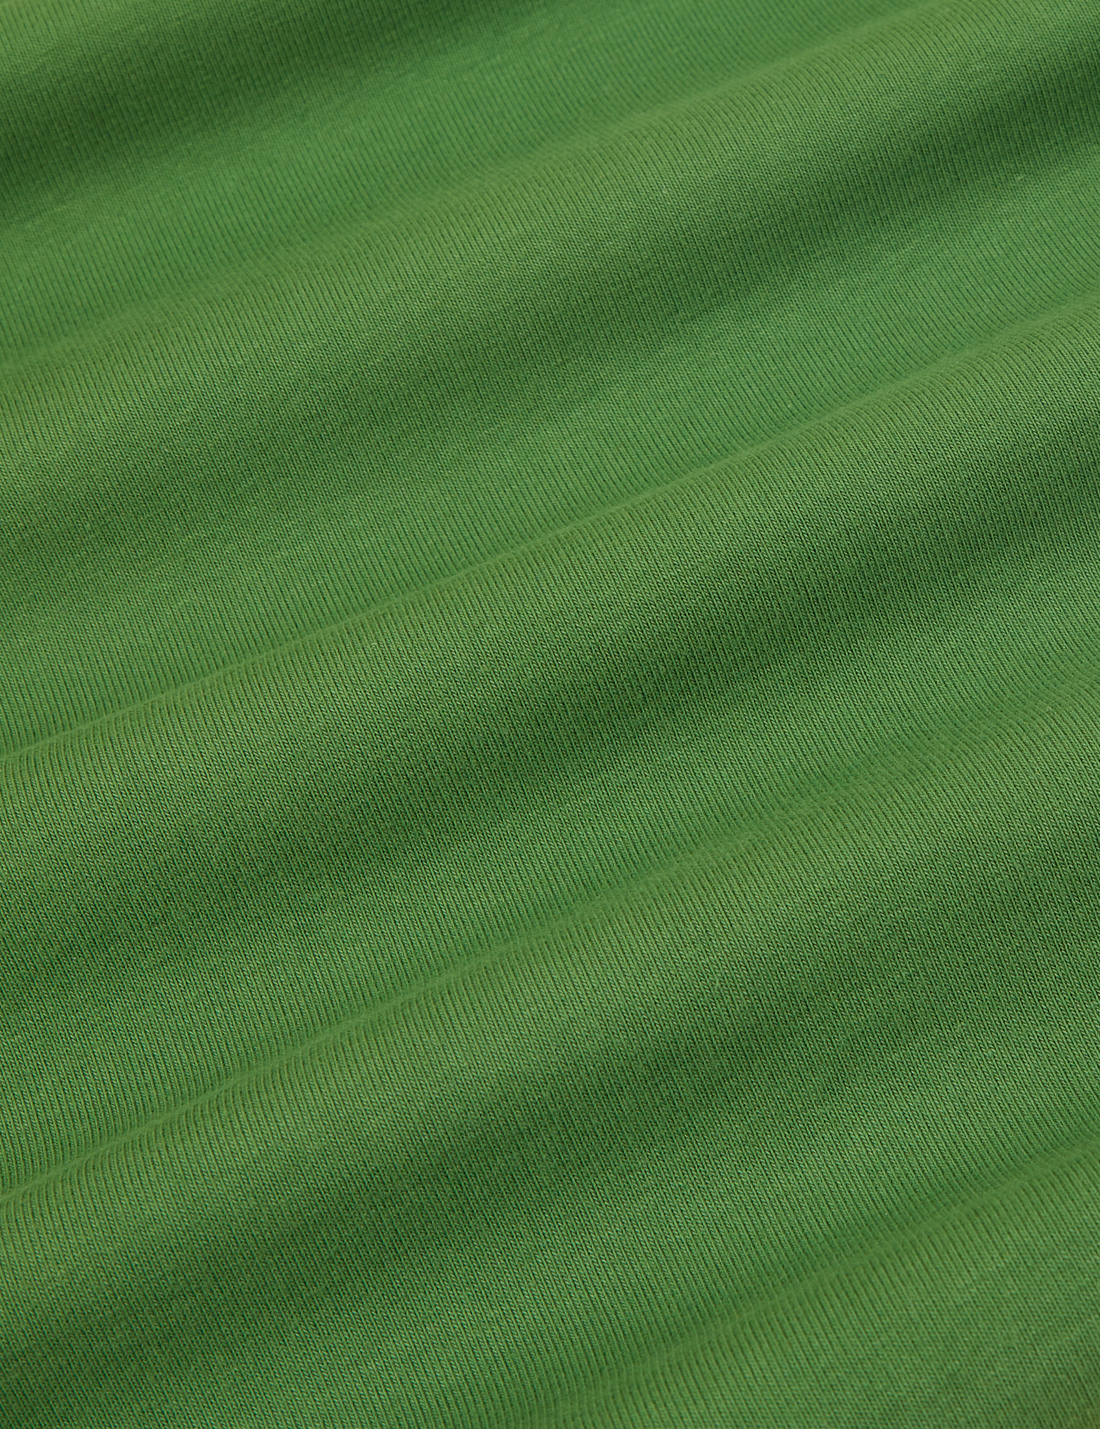 Cropped Tank Top in Lawn Green fabric detail close up